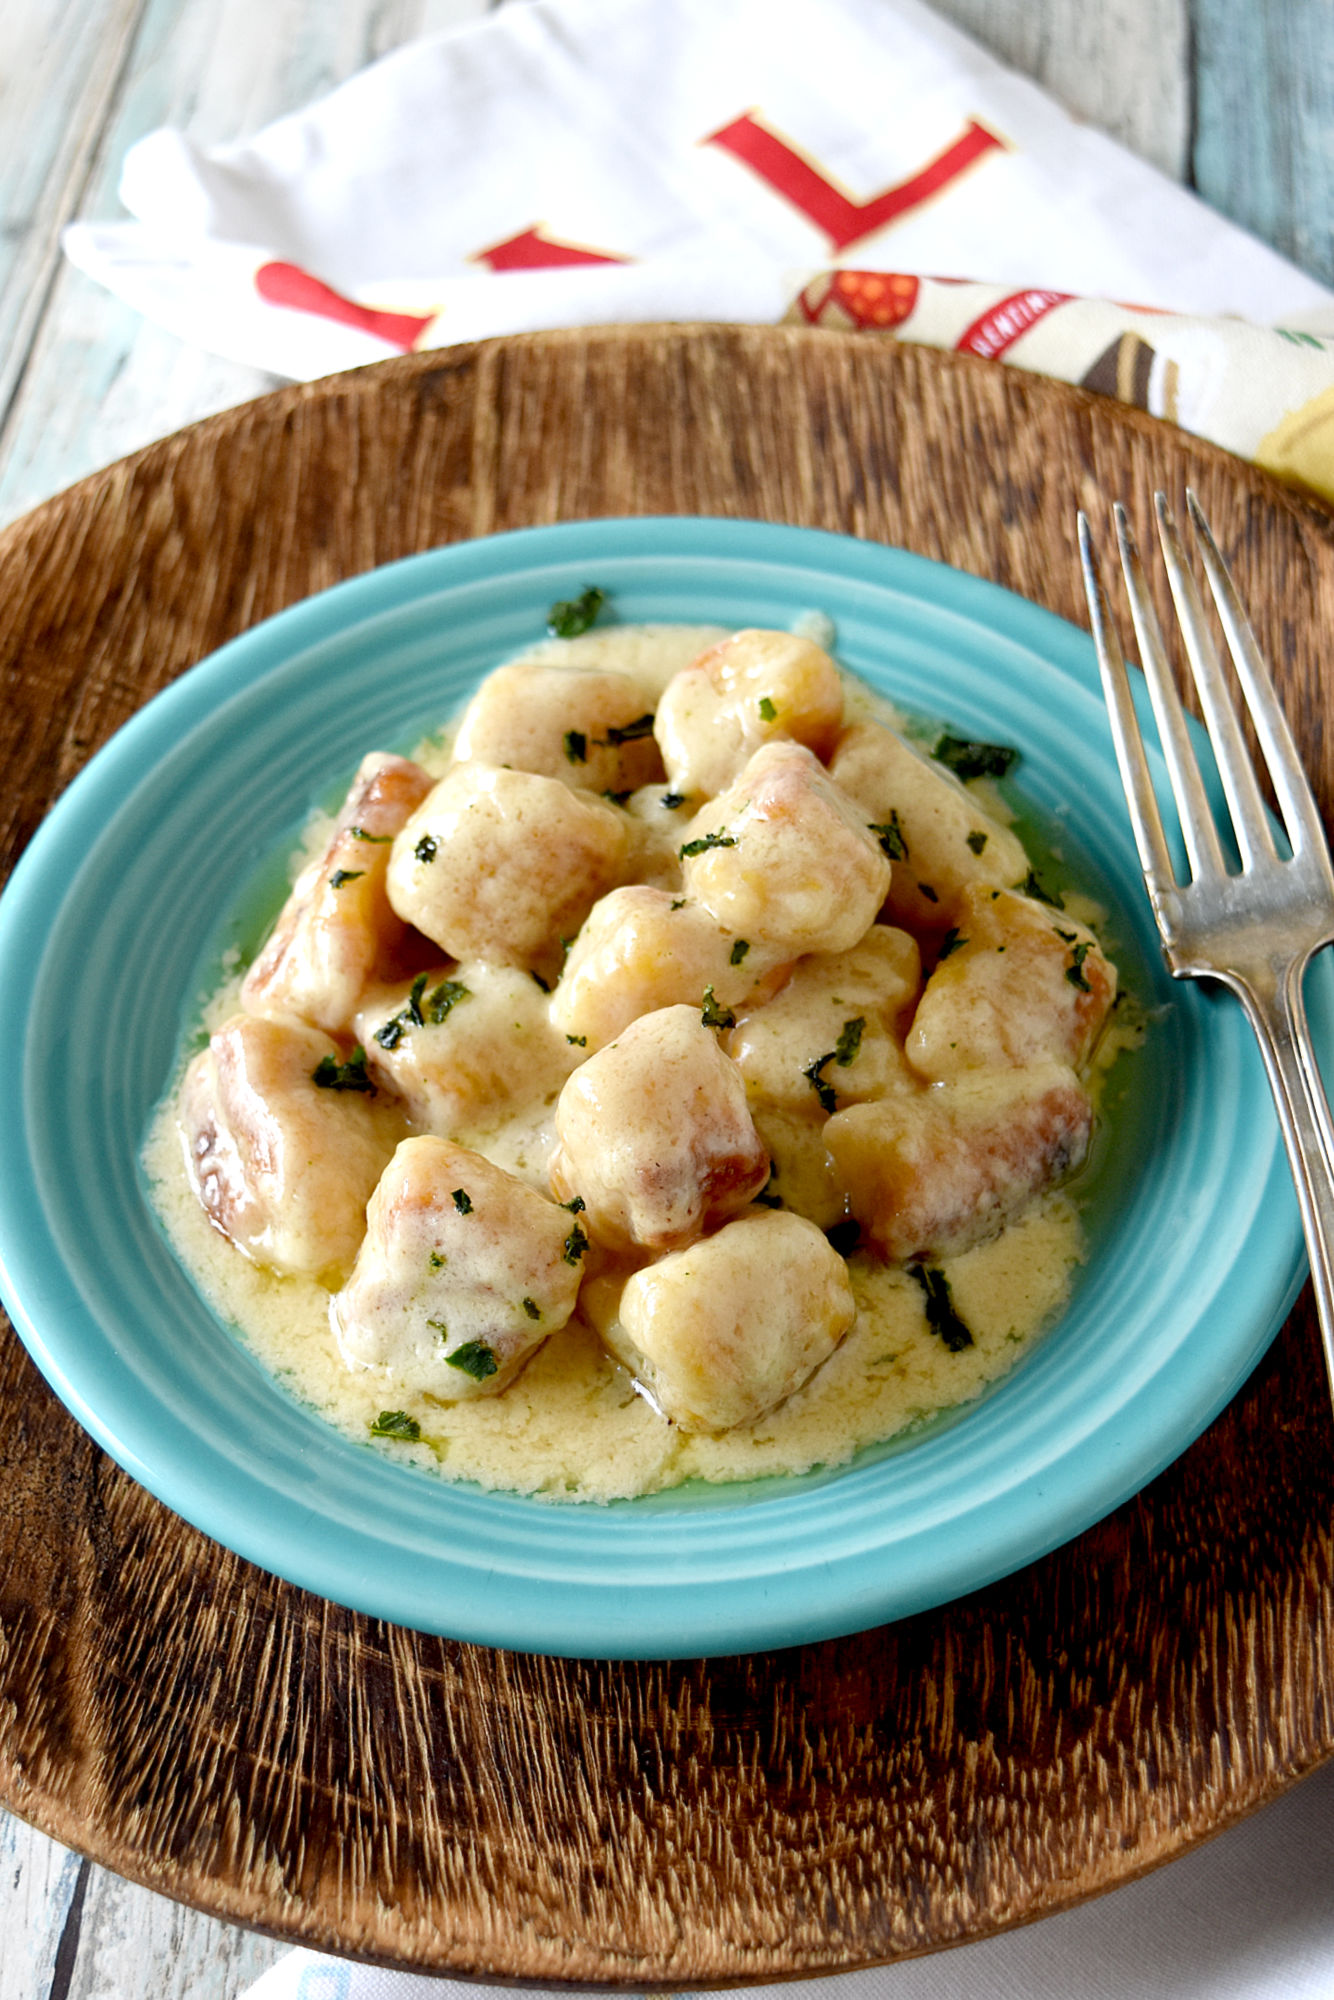 Butternut Squash Gnocchi are simple to make and has a rich flavor from the ricotta and butternut squash.  The flecks of orange throughout the gnocchi make these perfect for a fall dinner. #FallFlavors